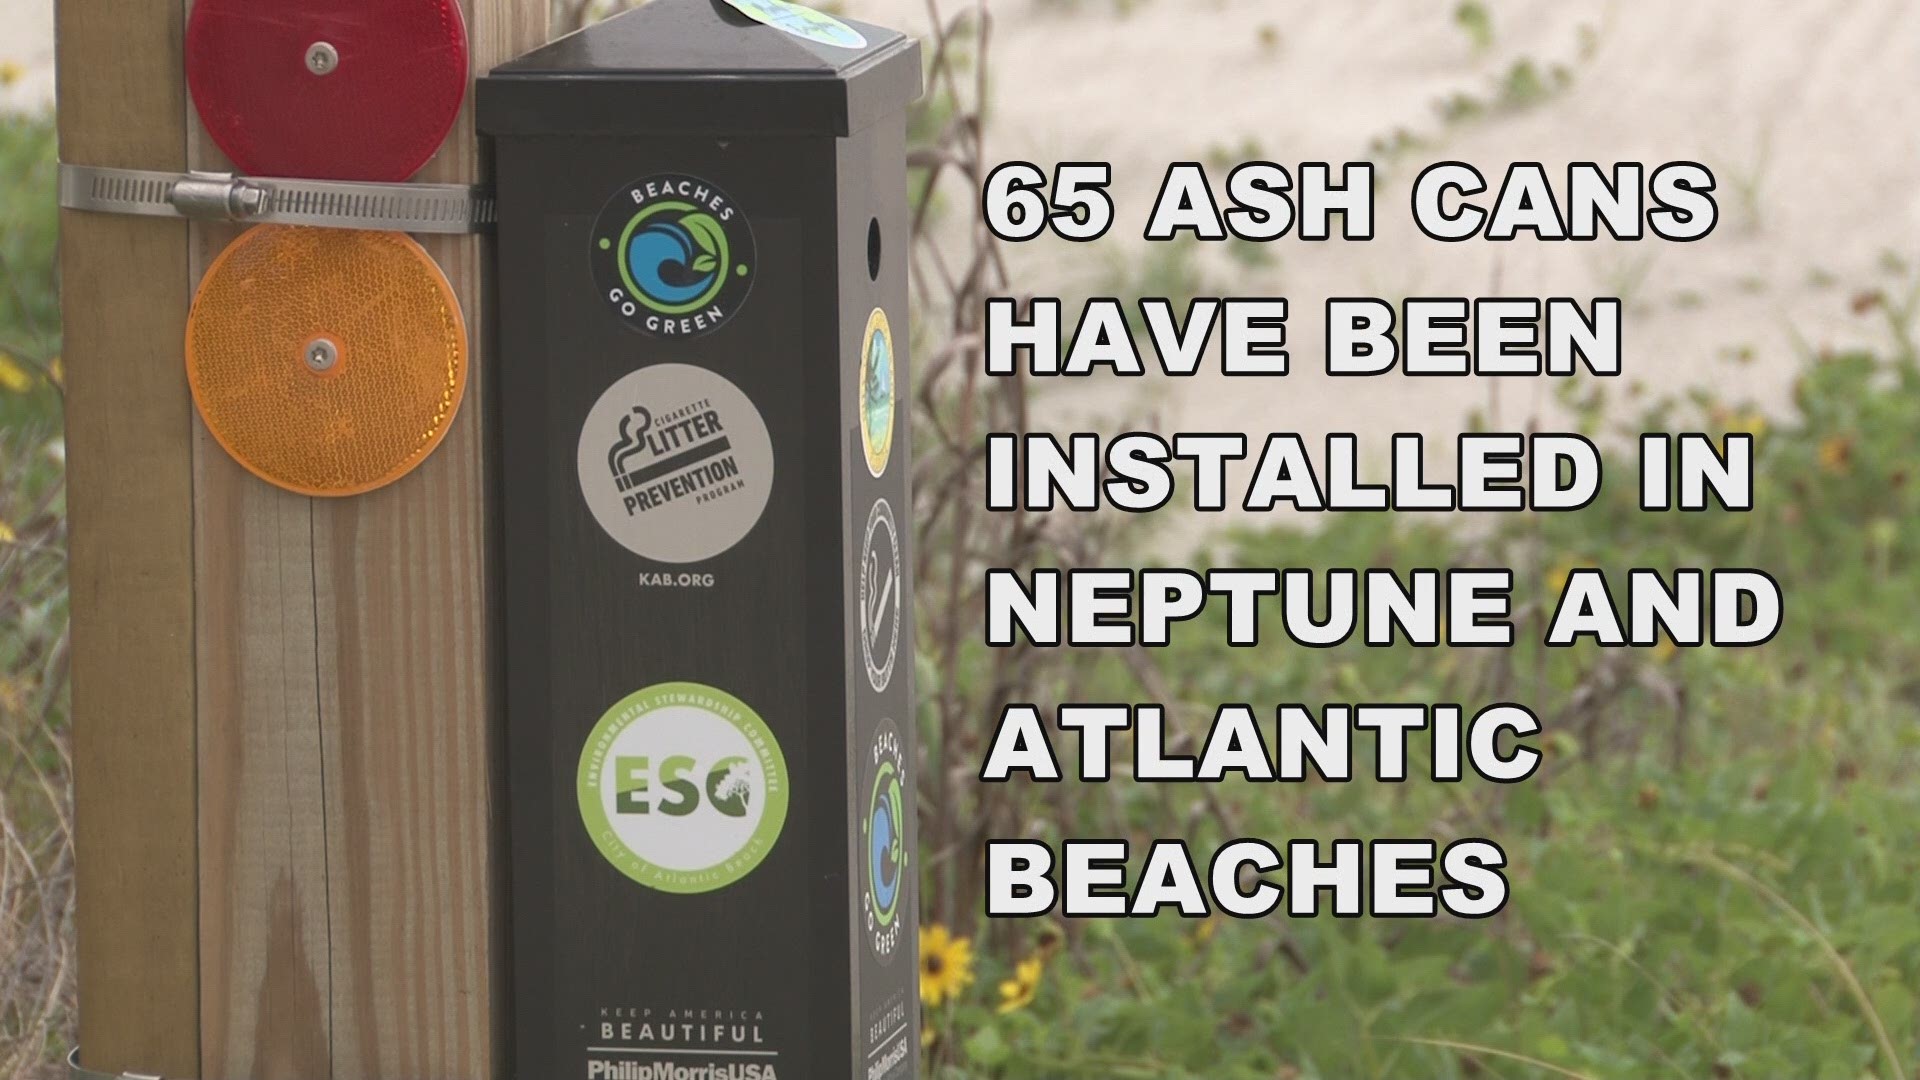 It's pop quiz time: What's the most littered item on the planet? If you guessed cigarette butts, you're right. Check out this new tool at our local beaches to help curb the butt problem.